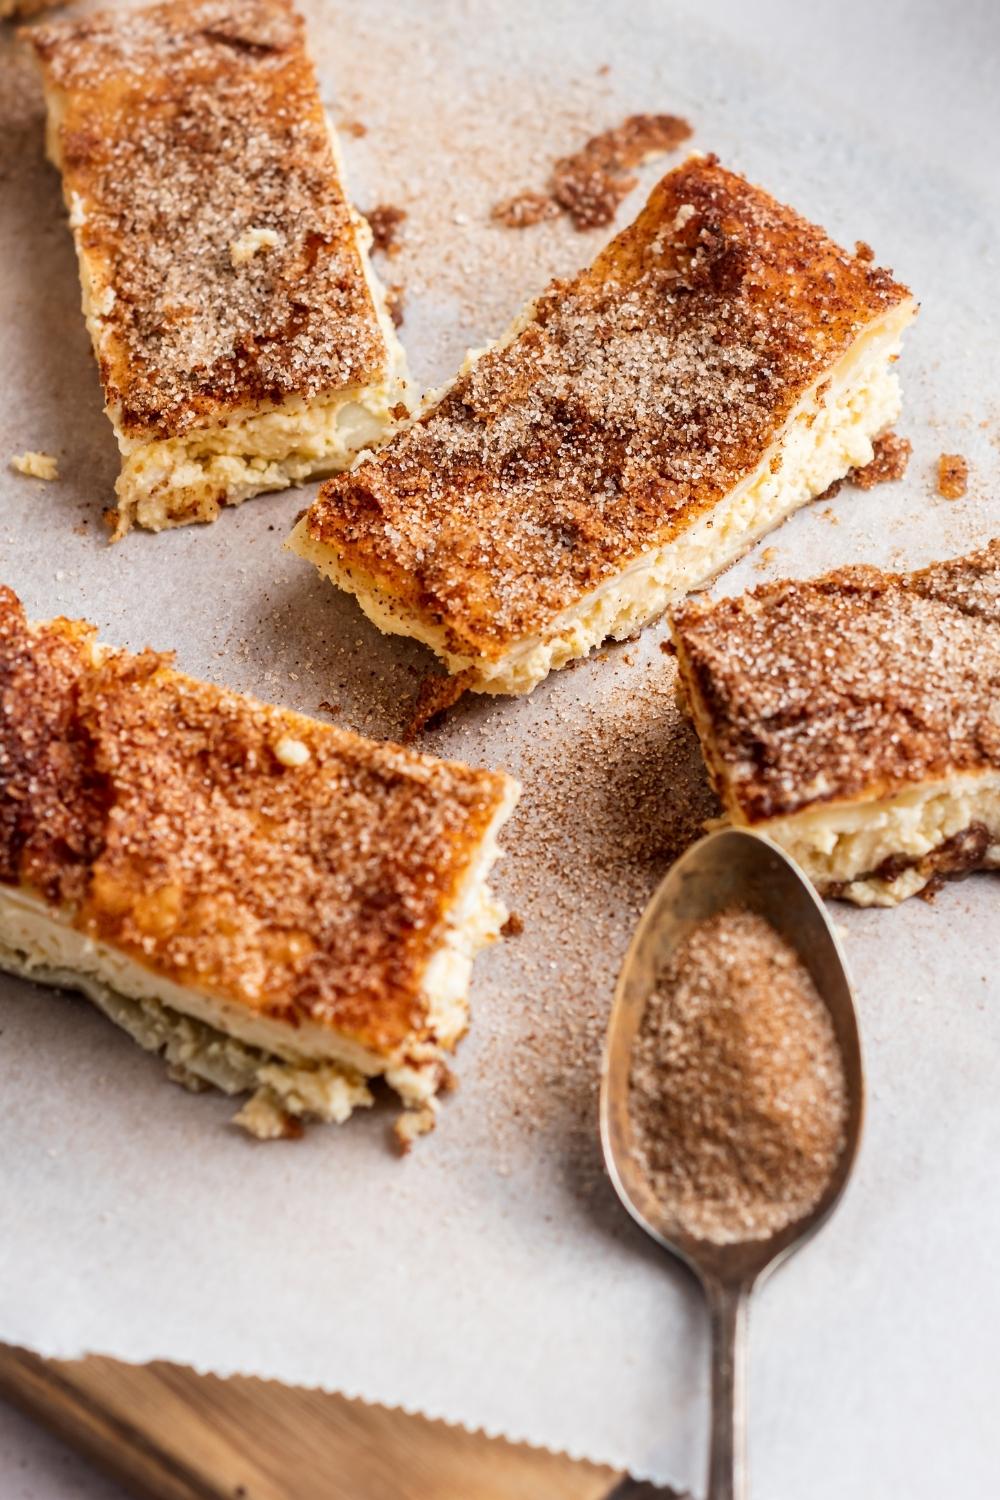 Four churro cheesecake bars on parchment paper. A spoonful of cinnamon and sugar sits next to them.